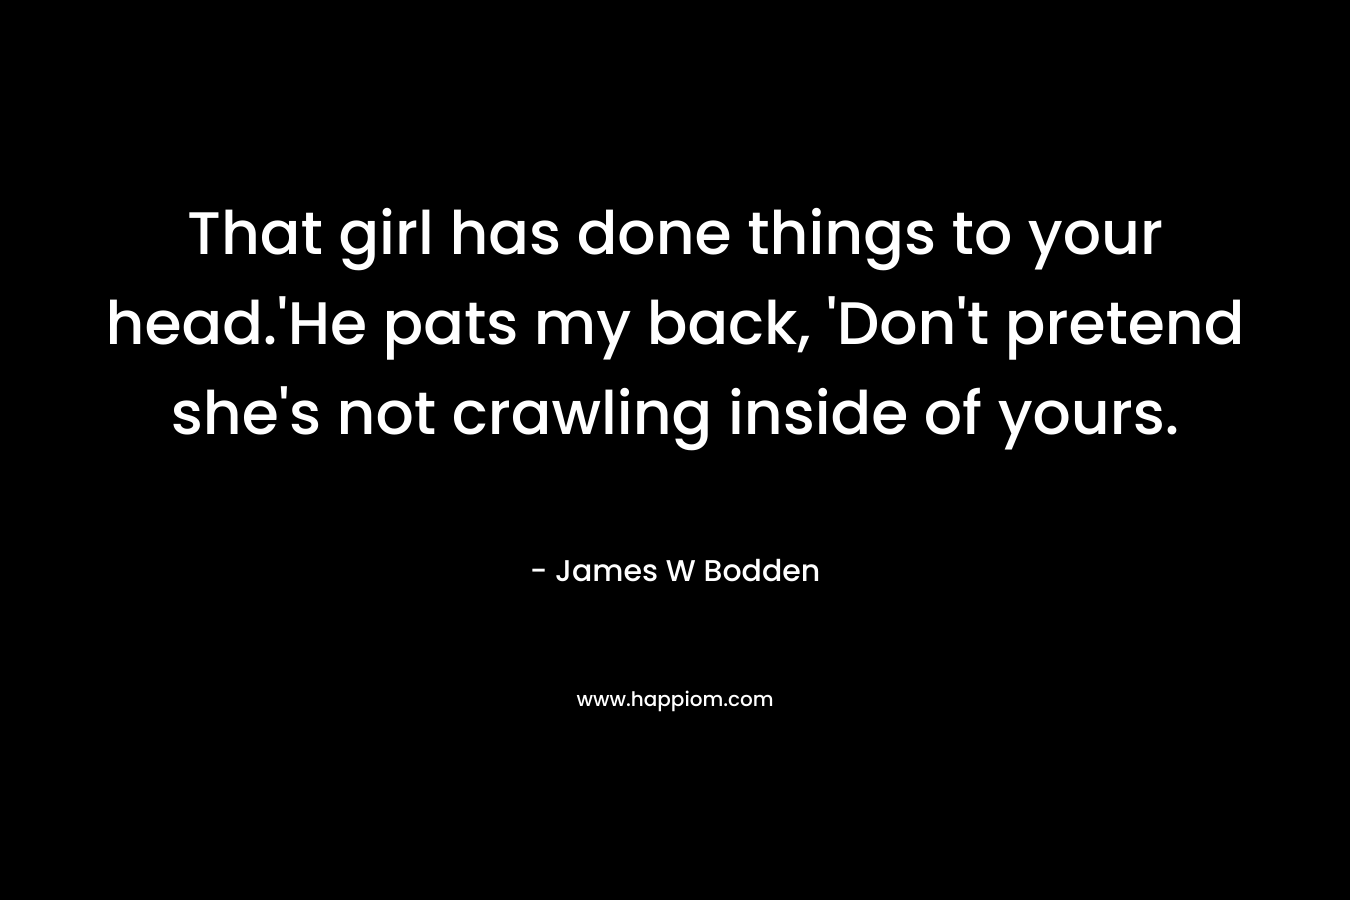 That girl has done things to your head.’He pats my back, ‘Don’t pretend she’s not crawling inside of yours. – James W Bodden